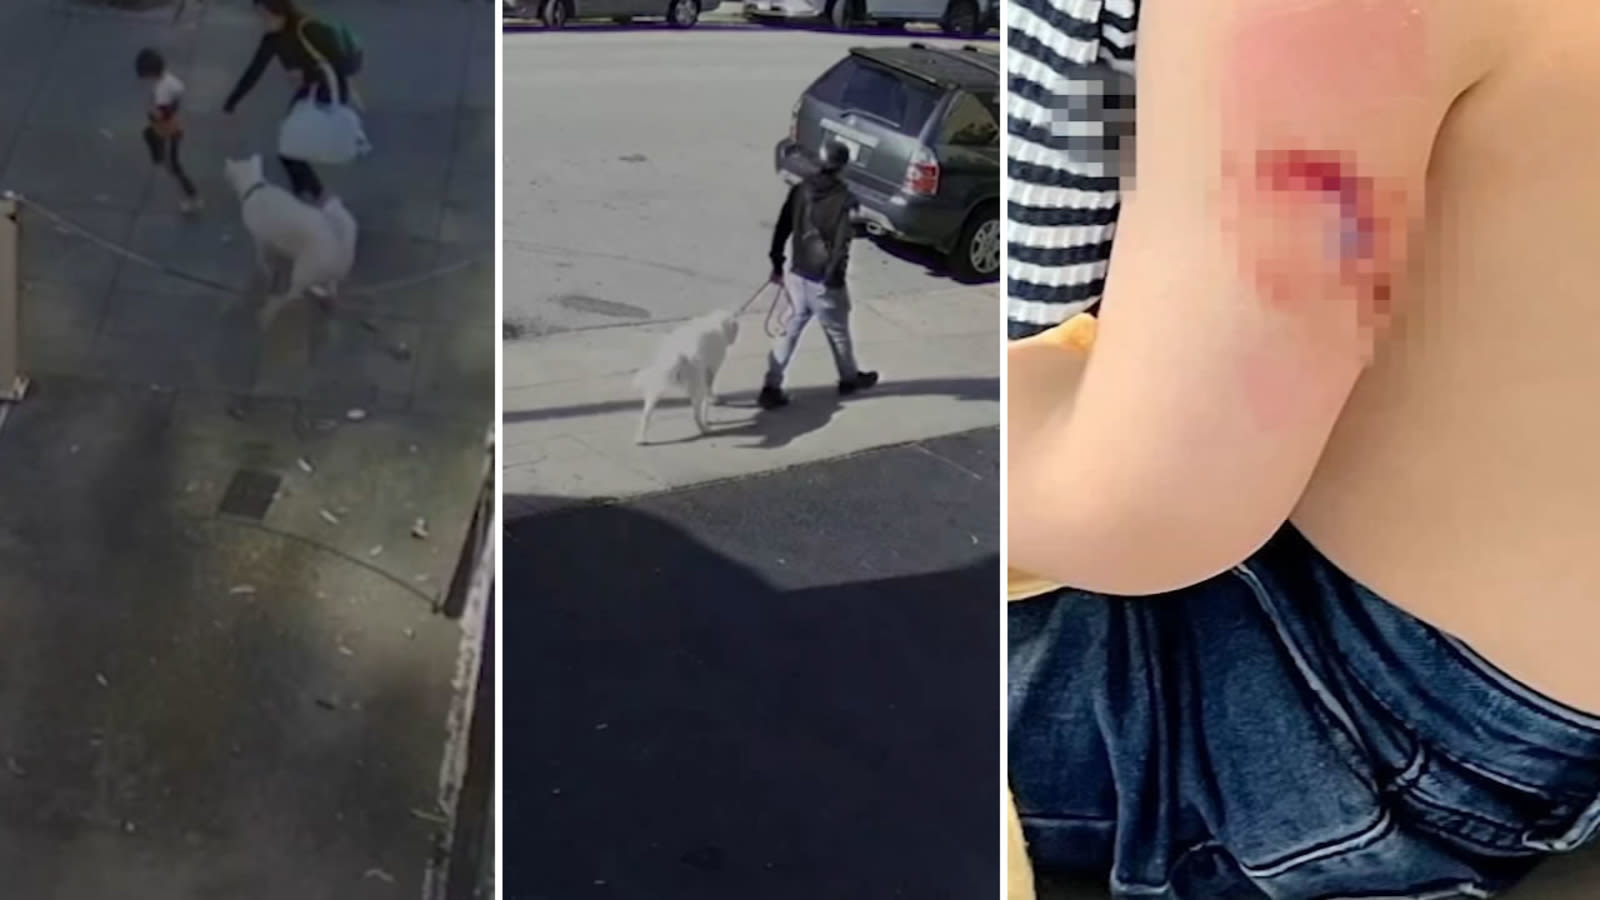 San Francisco family furious after 4-year-old son attacked by dog, owners walk away